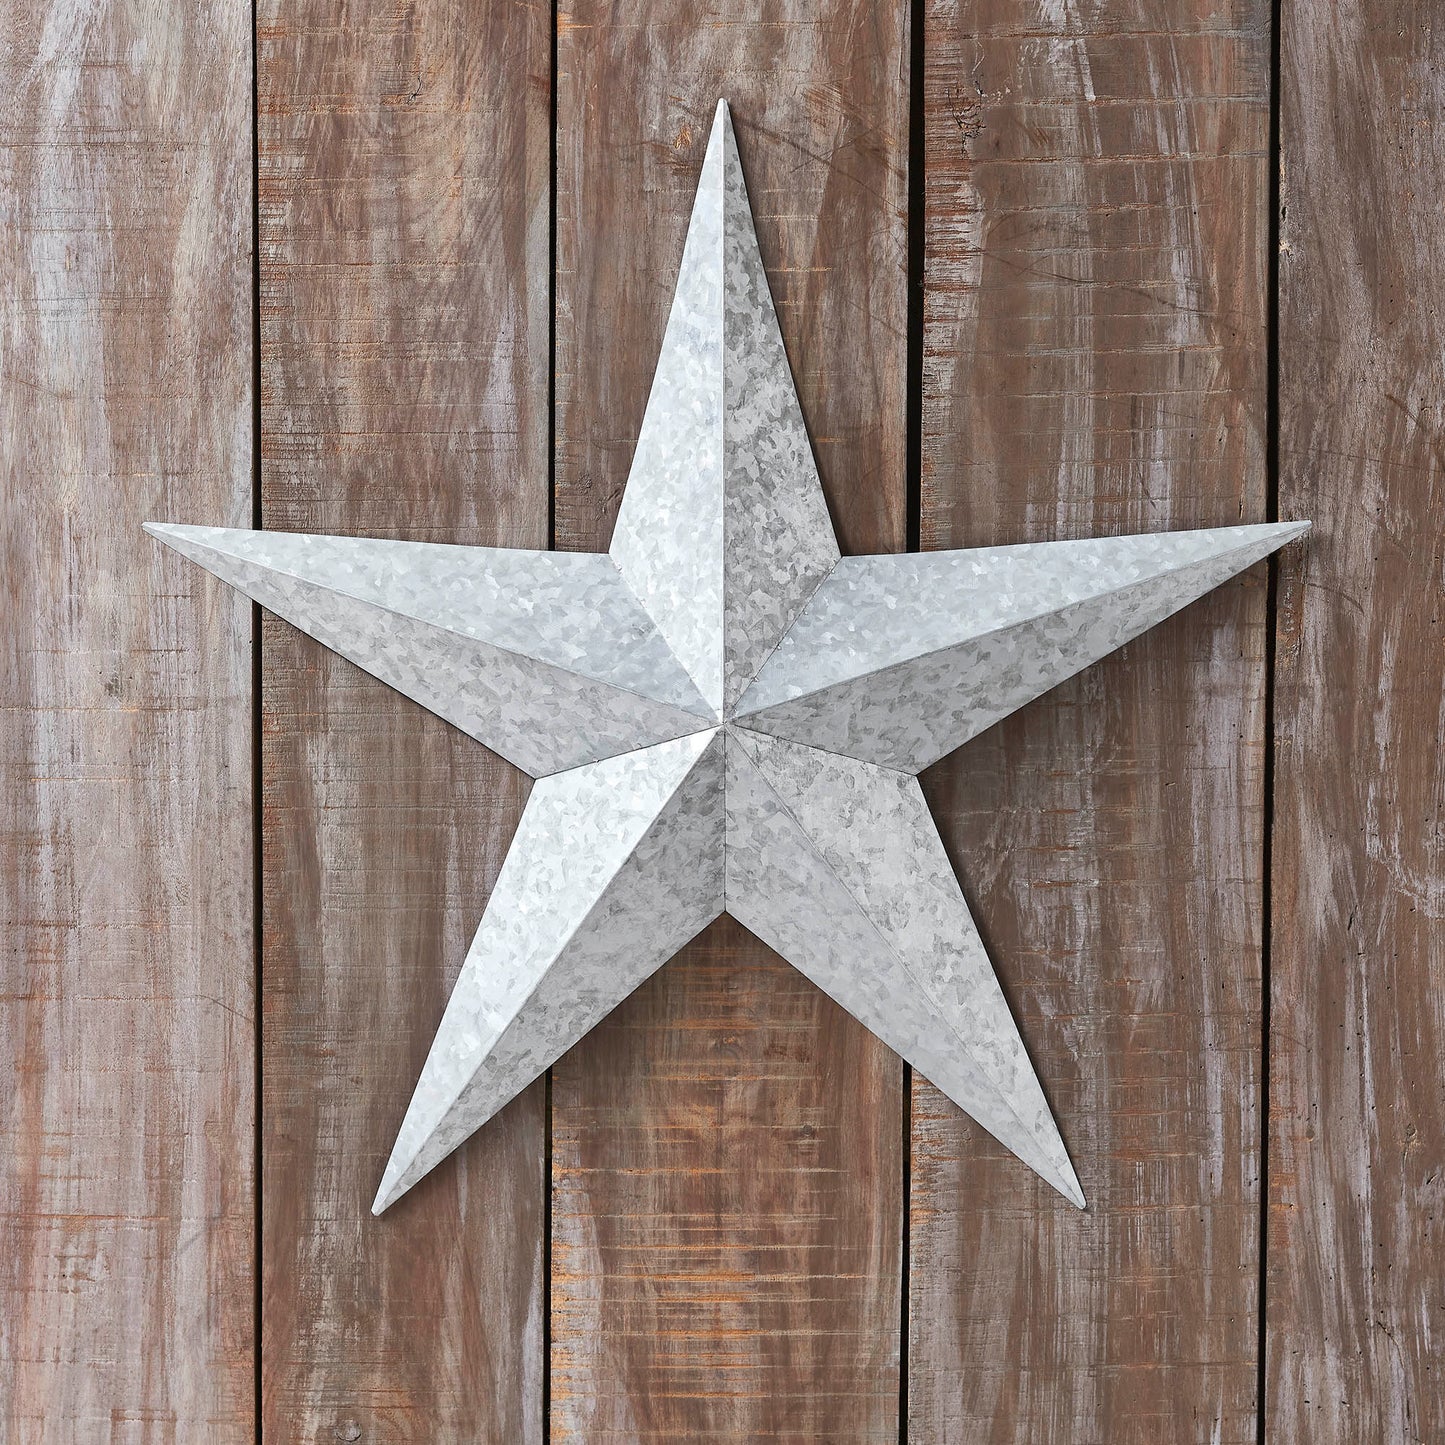 VHC Brands Patriotic Faceted Metal Star Galvanized Wall Hanging 24x24, Independence Day Decor, American Star Design, Distressed Appearance Metal Wall Hanging,  Star Shape, Country, Metal Grey